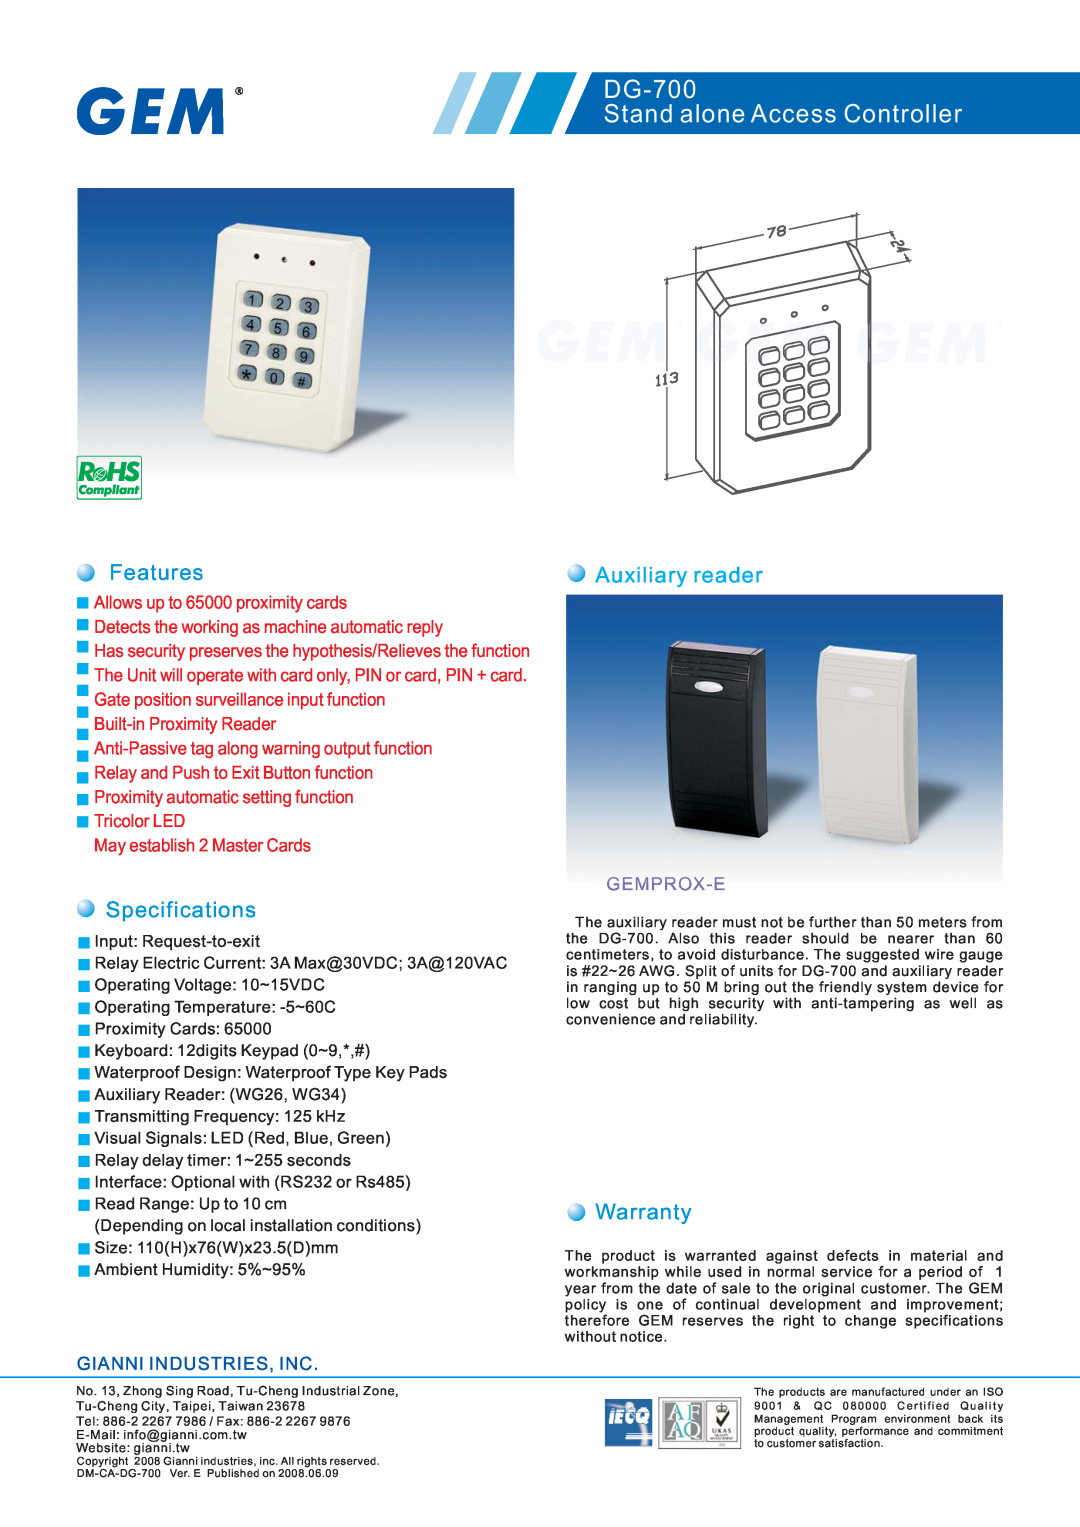 Gianni Industries specifications DG-700 Stand alone Access Controller, Features, Specifications, Auxiliary reader 